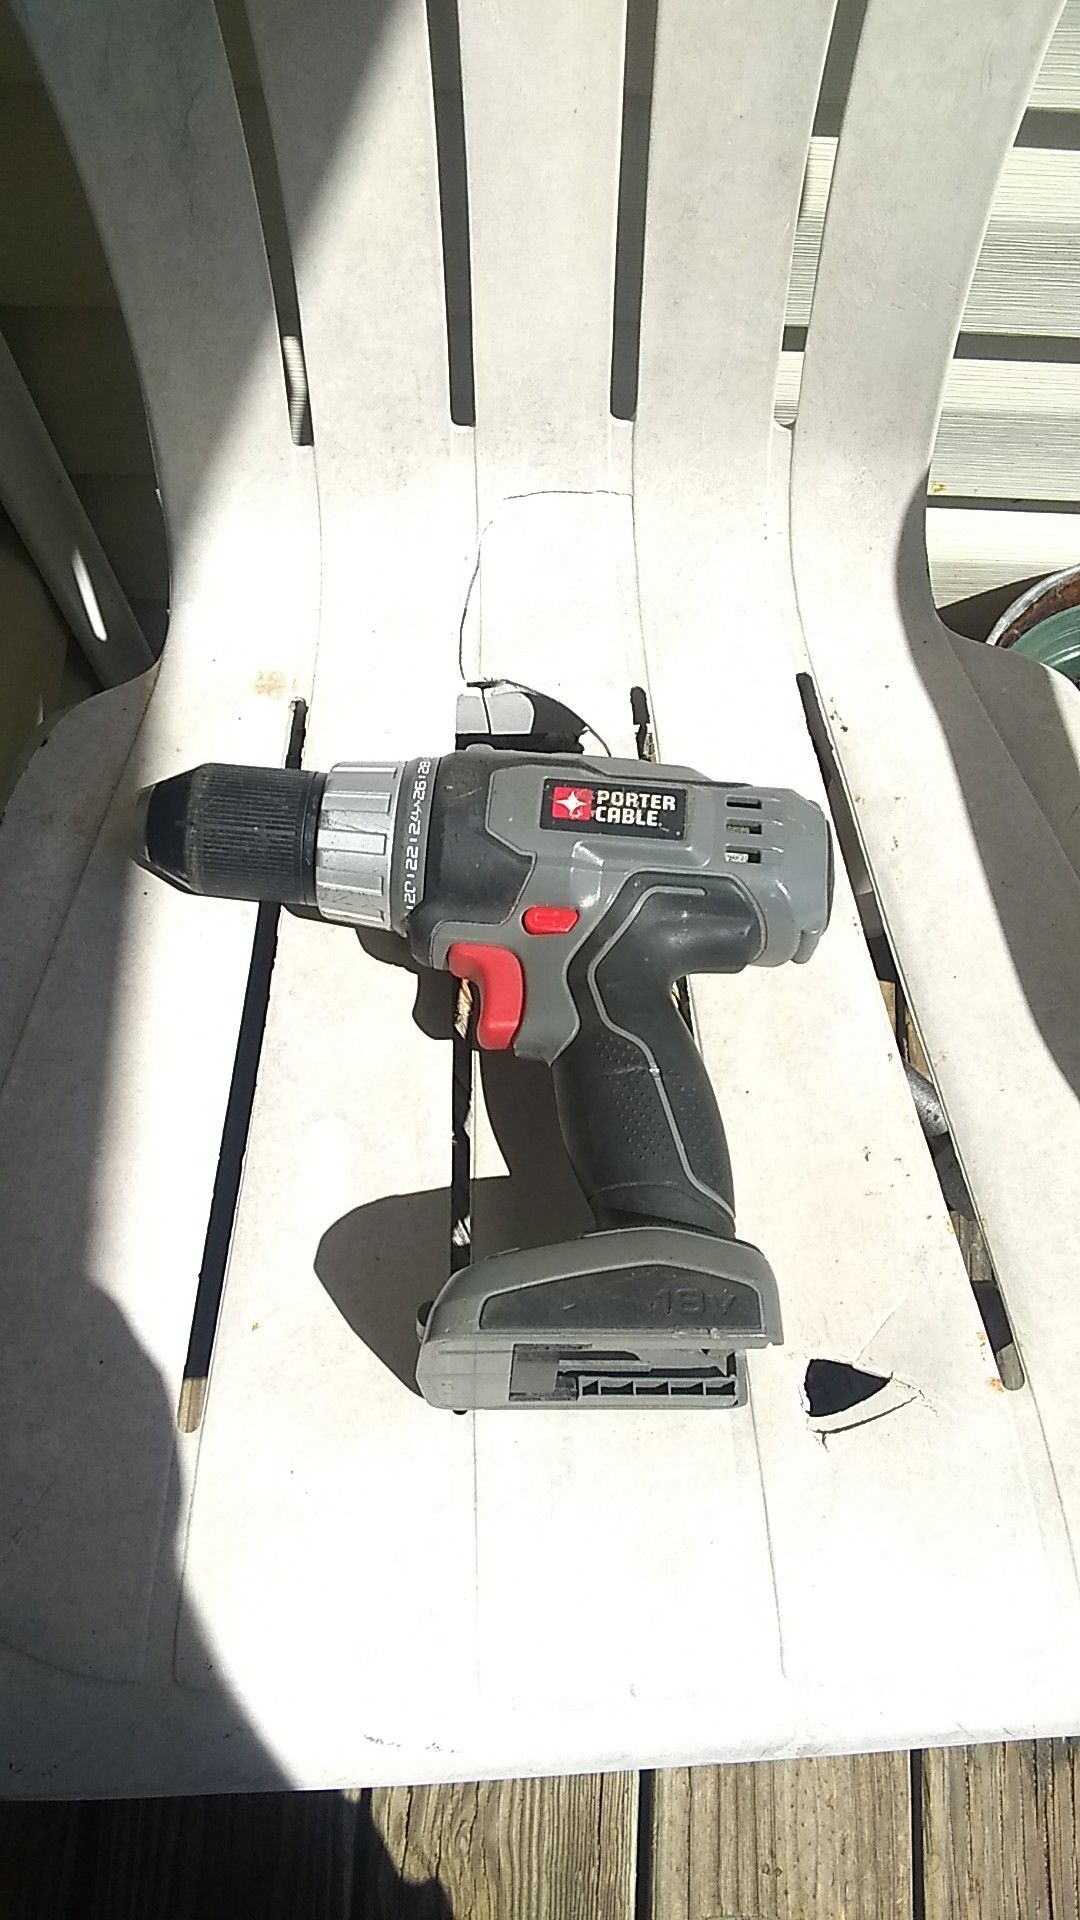 18volt Porter Cable saw and drill I lost the battery